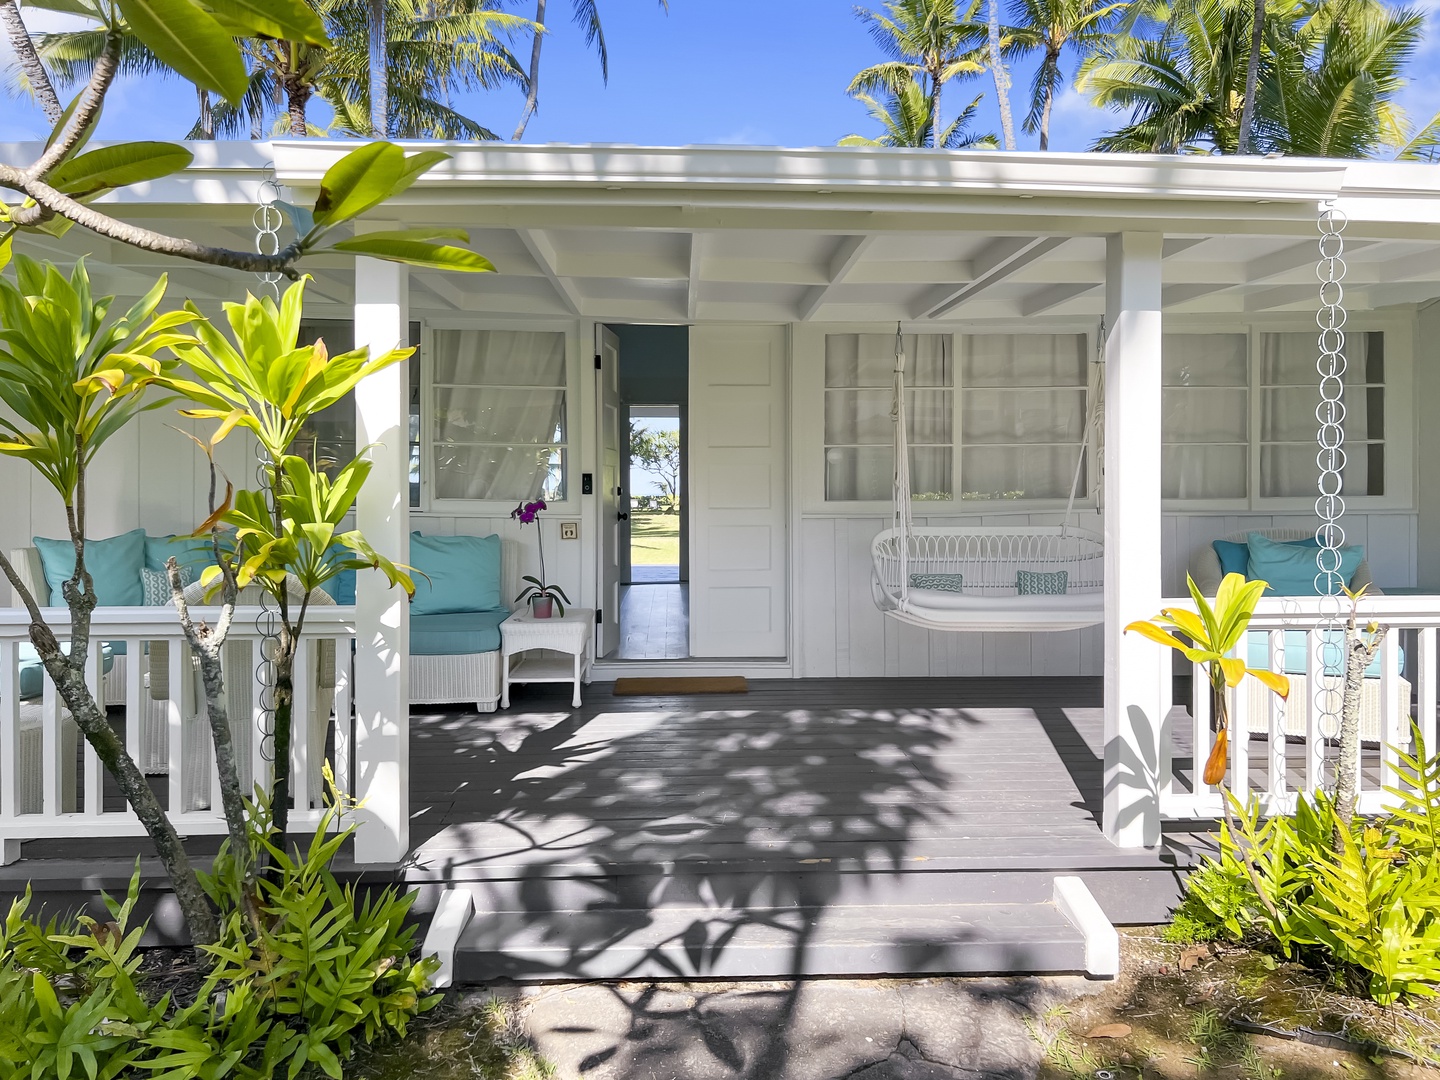 Kailua Vacation Rentals, Kai Mele - The covered front porch is a great place to have your morning coffee or relax after a long day of adventures